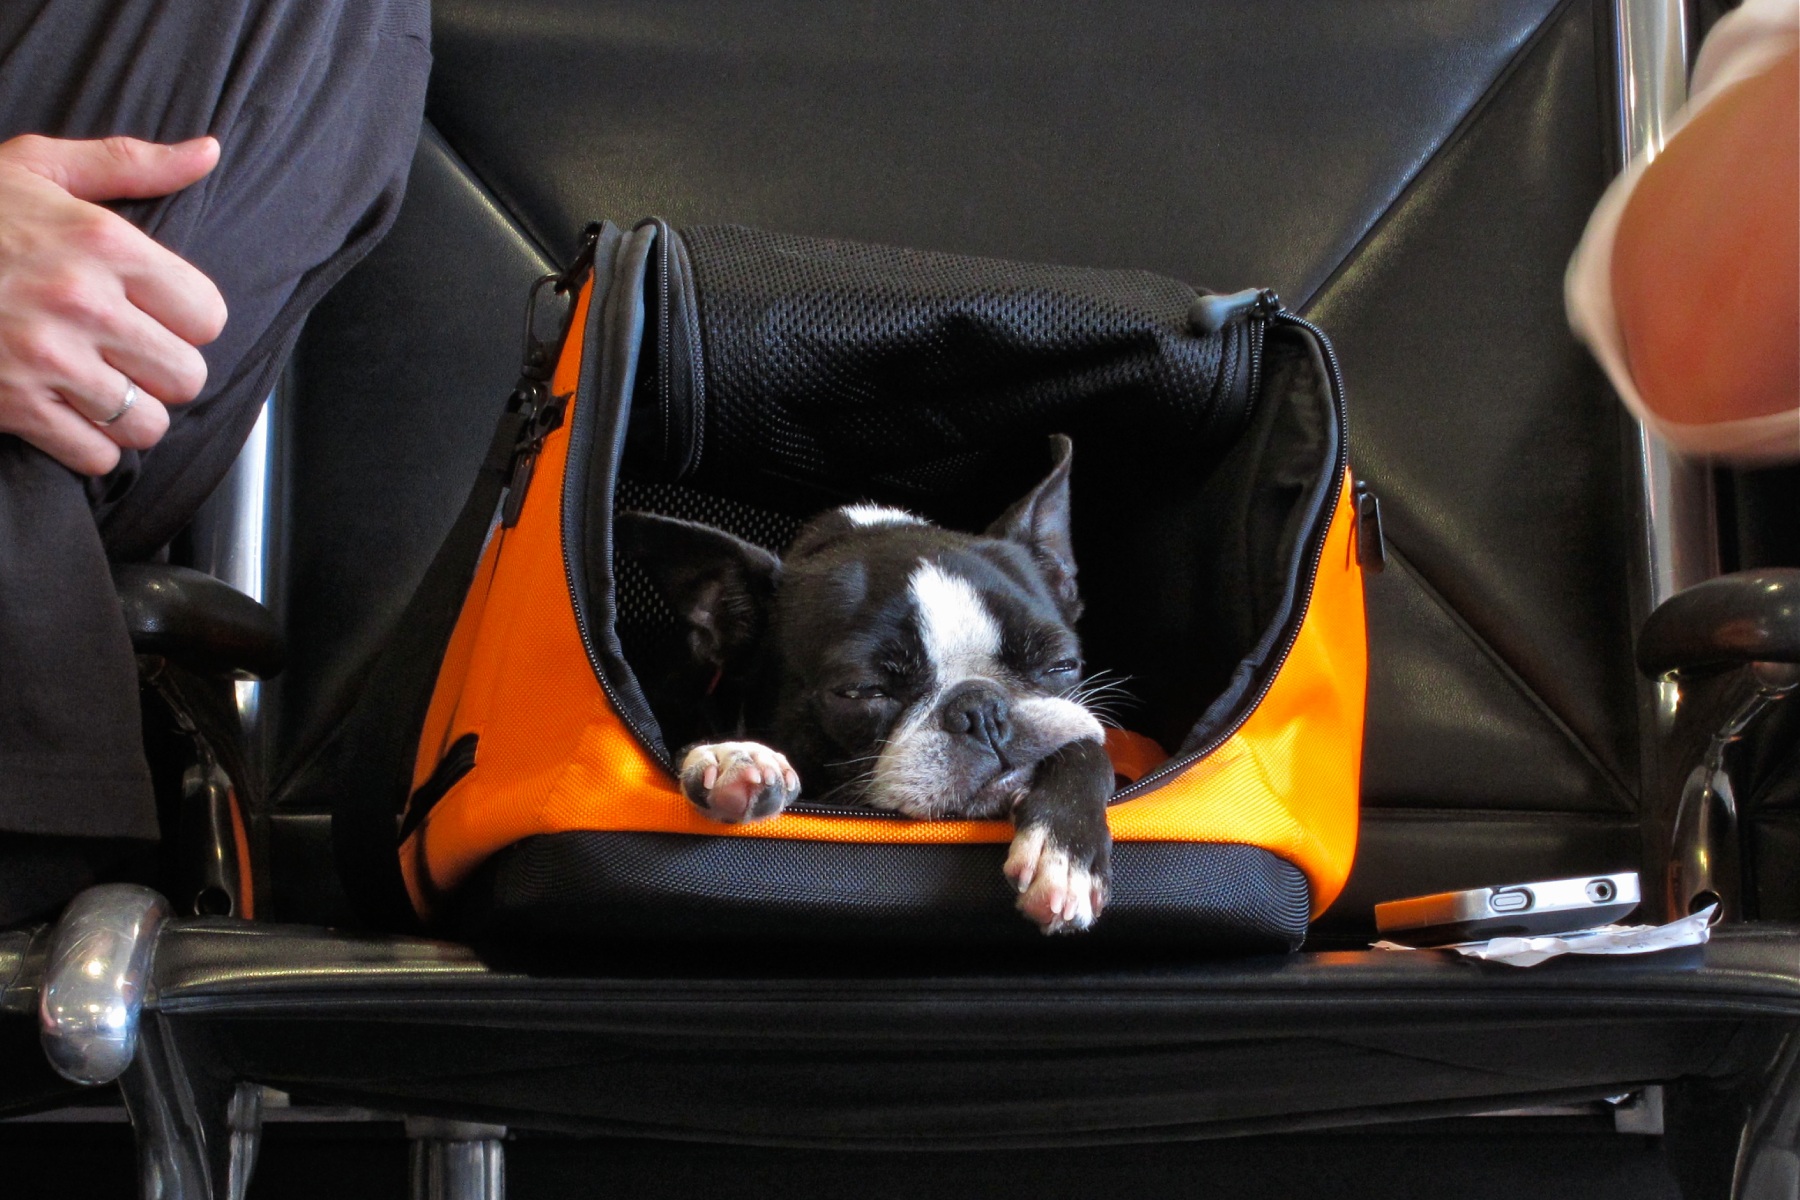 a sleepy dog waits in its carry-on container at an airport